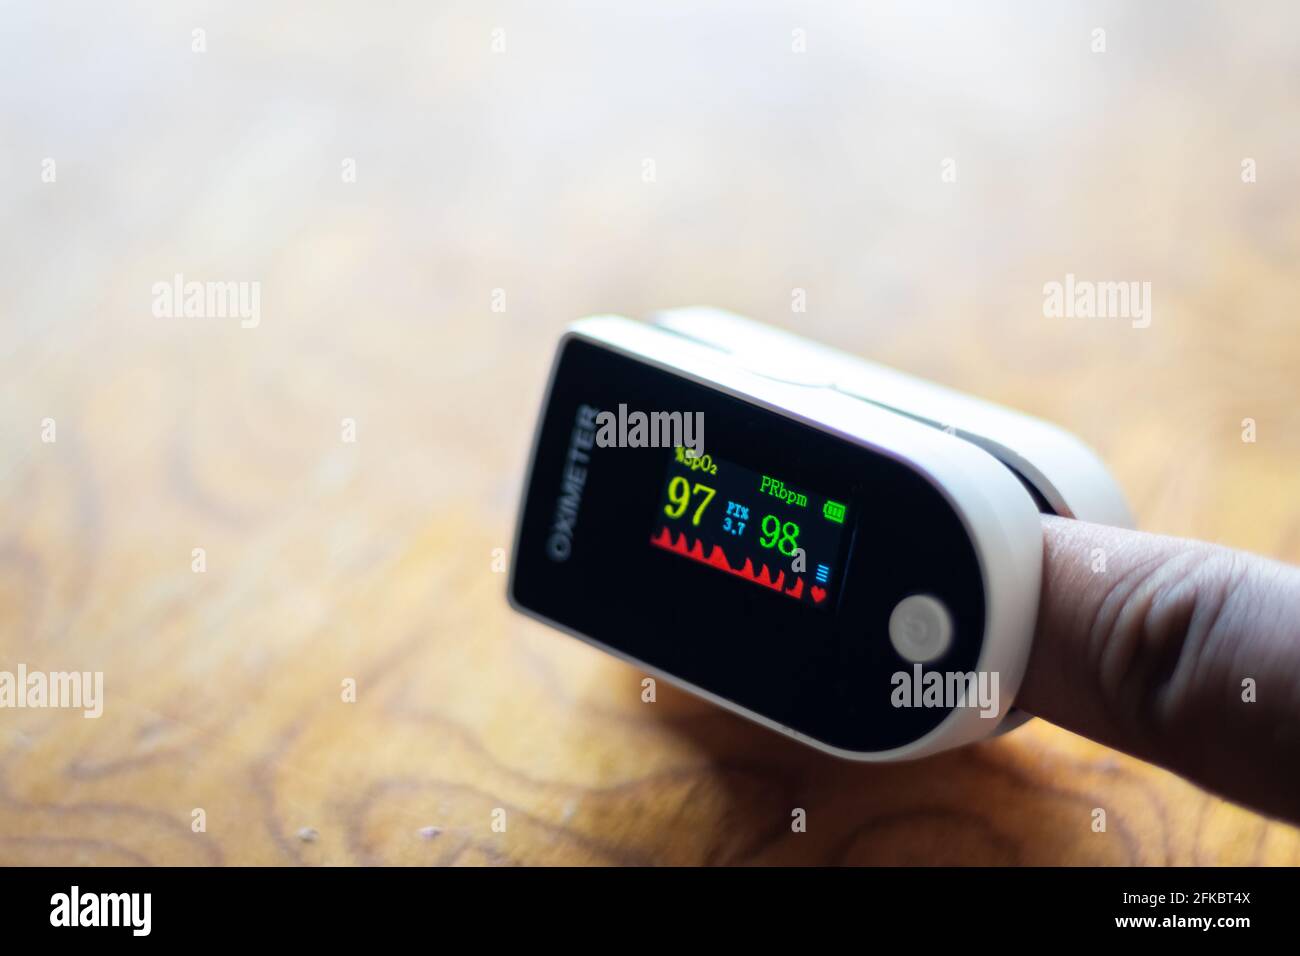 Pulse Oximeter to measure oxygen saturation level in body. Asian male hands puts index finger inside portable oximeter to measure oxygen level. Stock Photo